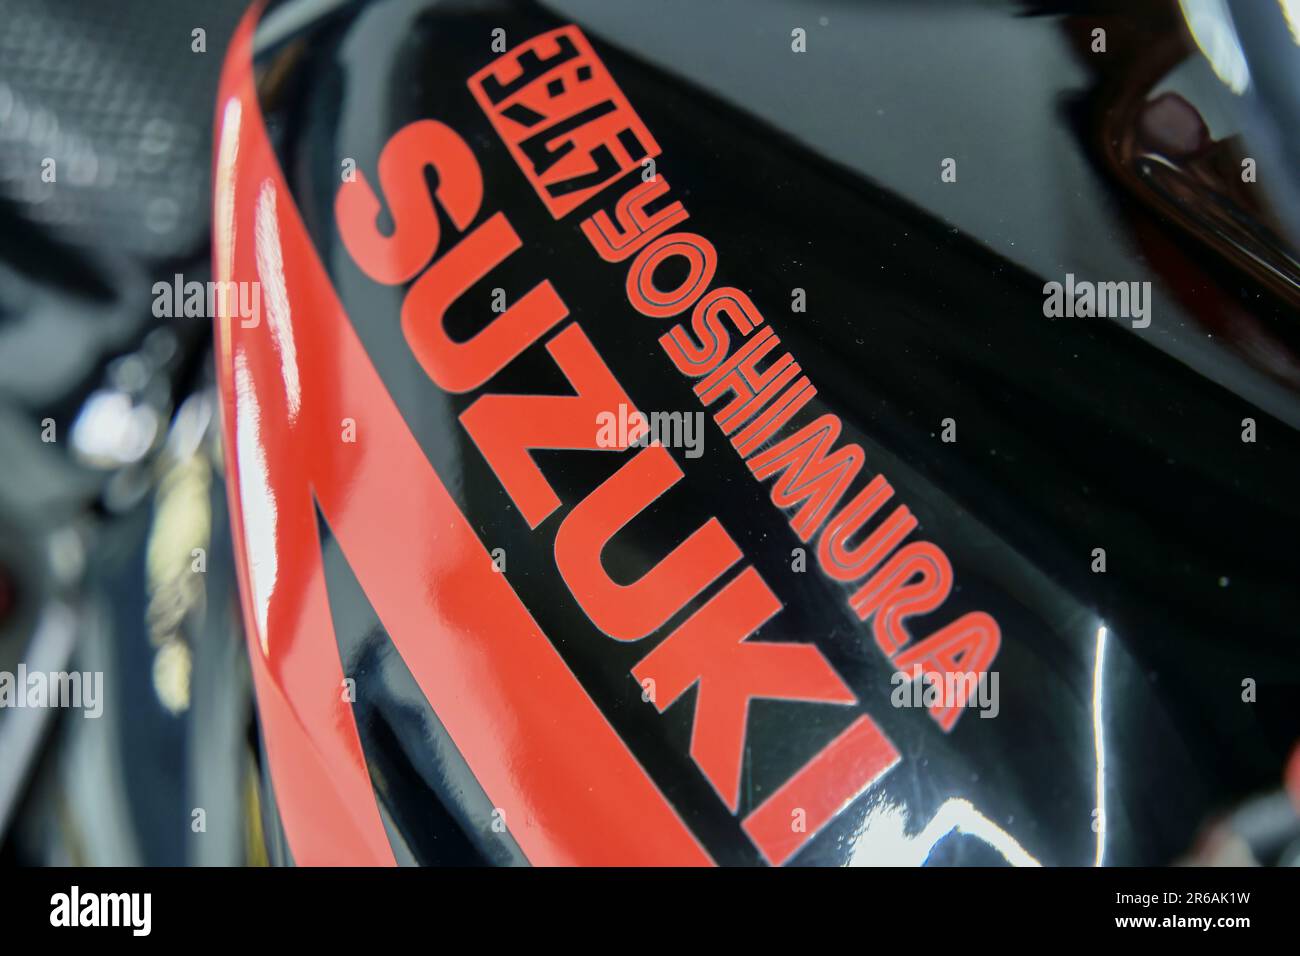 Gifhorn, Germany, March 31, 2023: Yoshimura Suzuki GSX-R 1000, detailed view of the motorcycle's tank with lettering and kanji characters, Gifhorn Bel Stock Photo